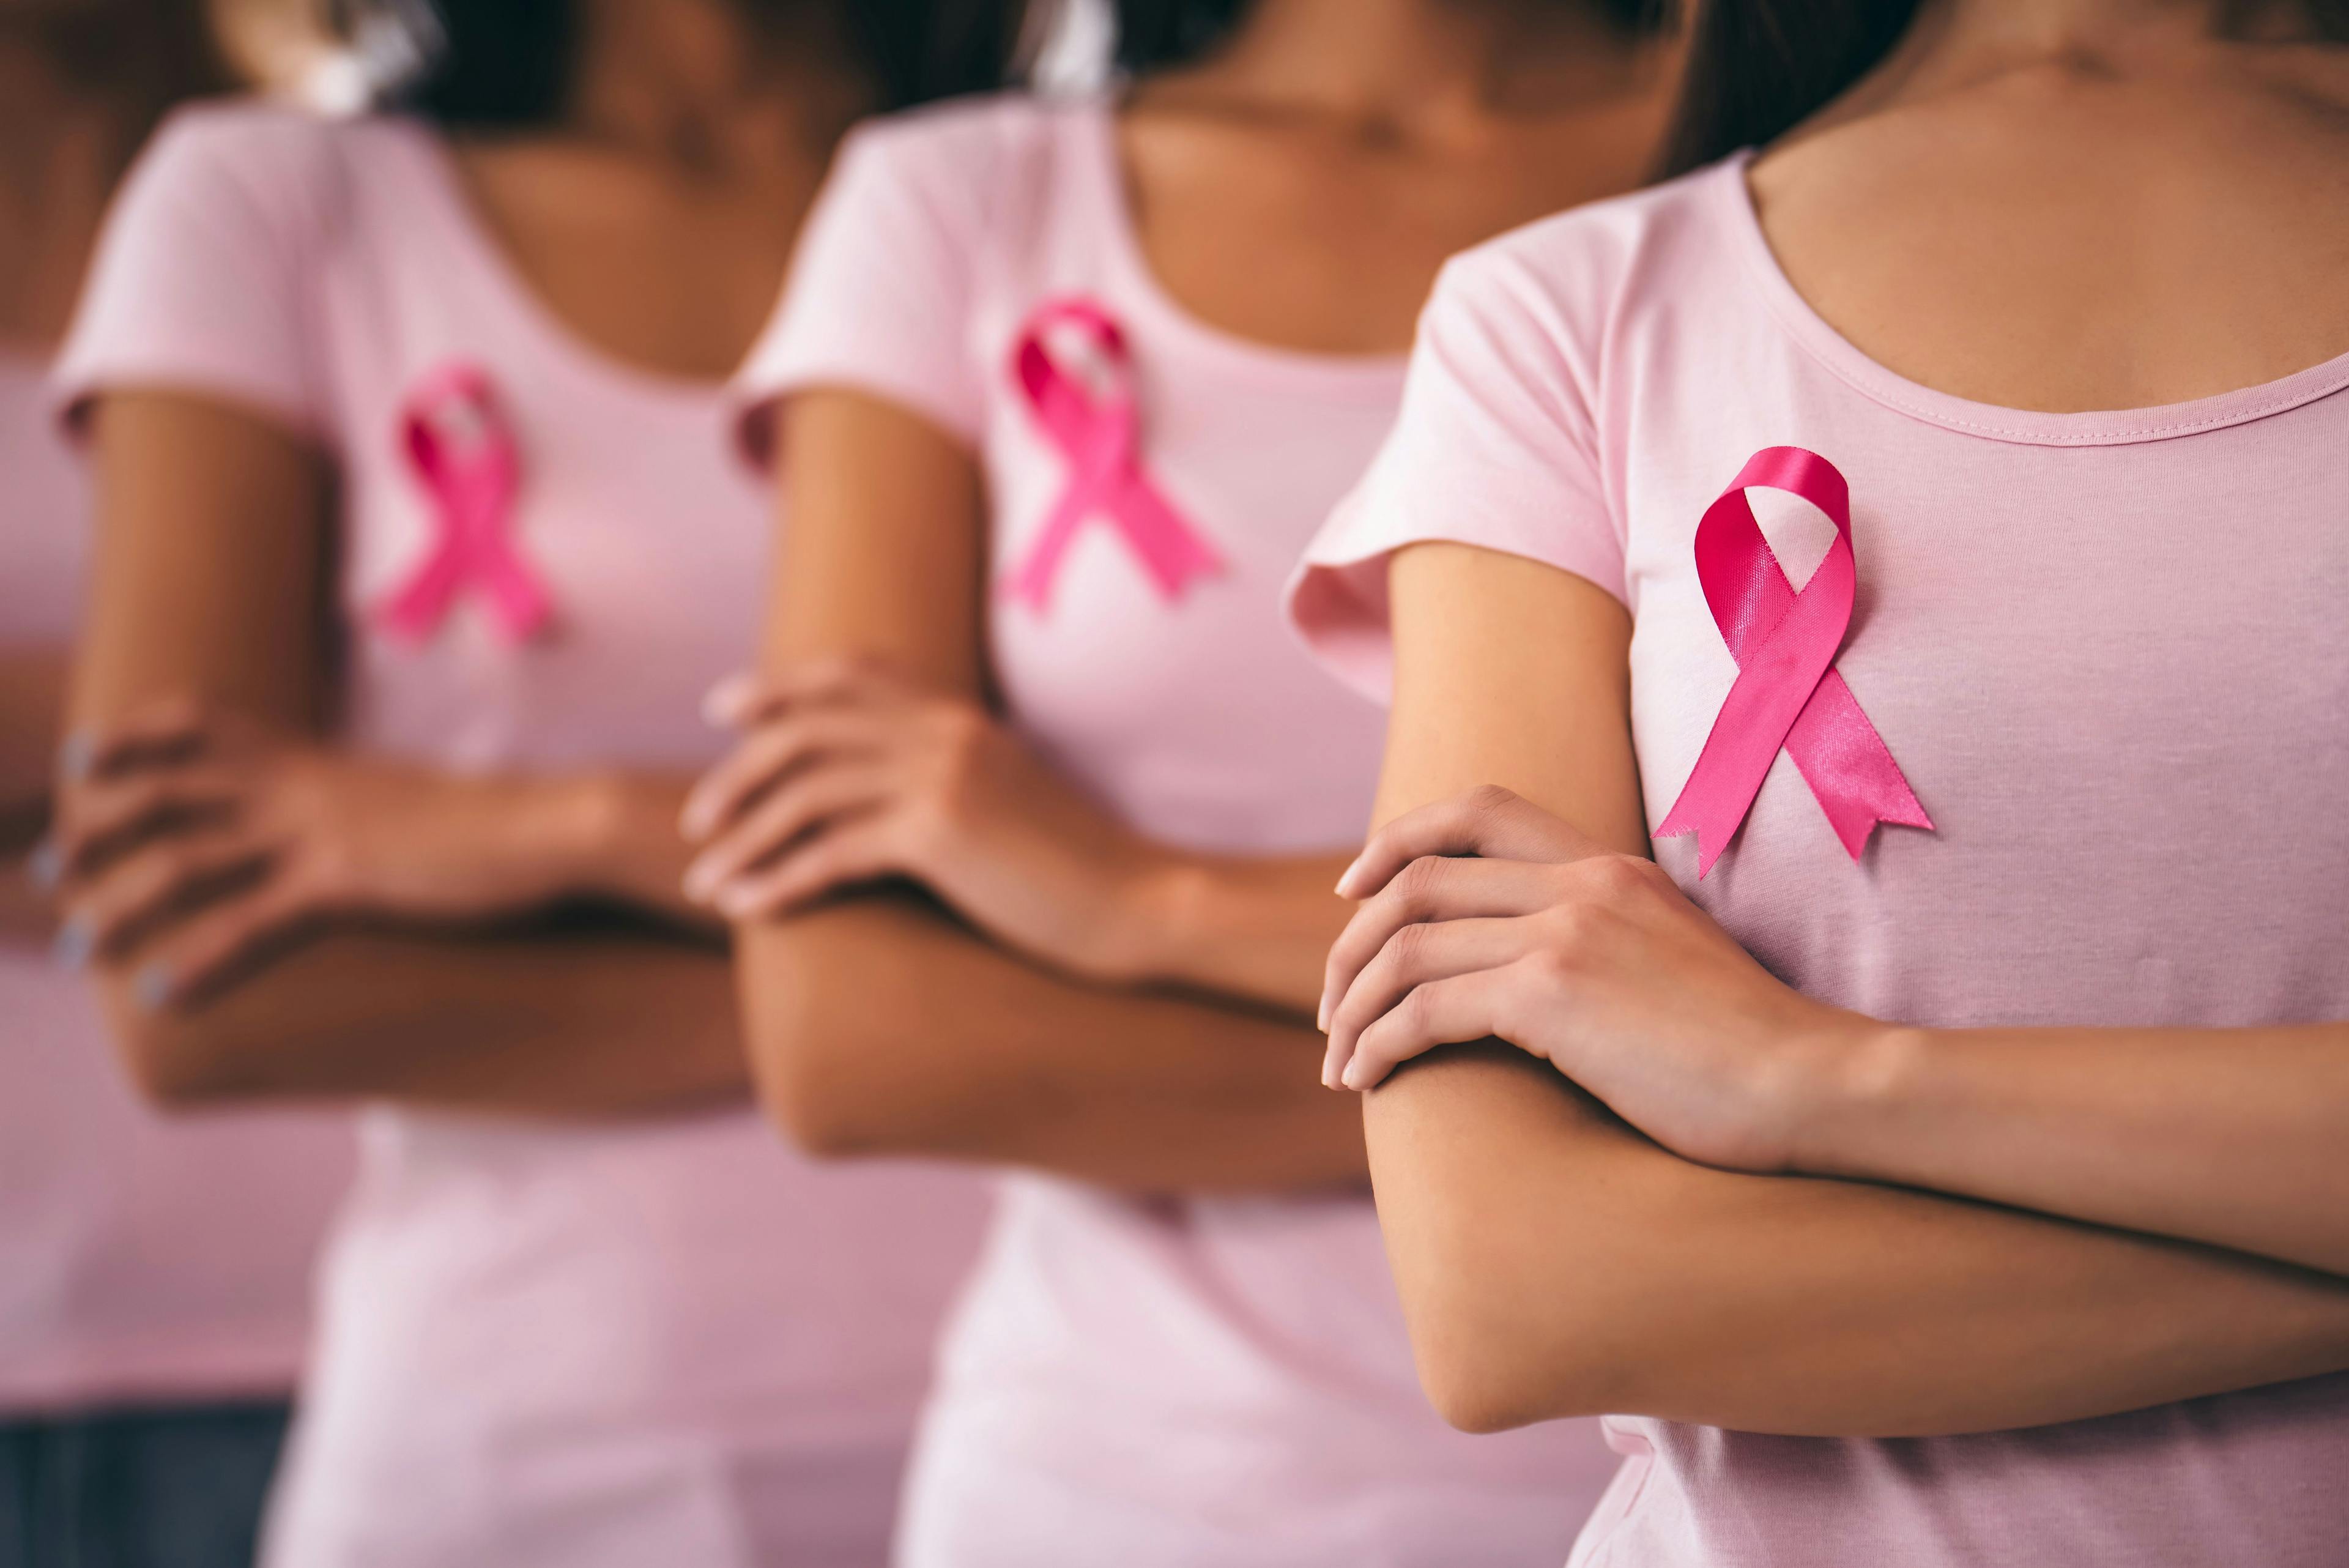 Latina breast cancer survivors are less likely to seek counseling due to concerns that the counselor will not understand their values or have linguistic challenges. 